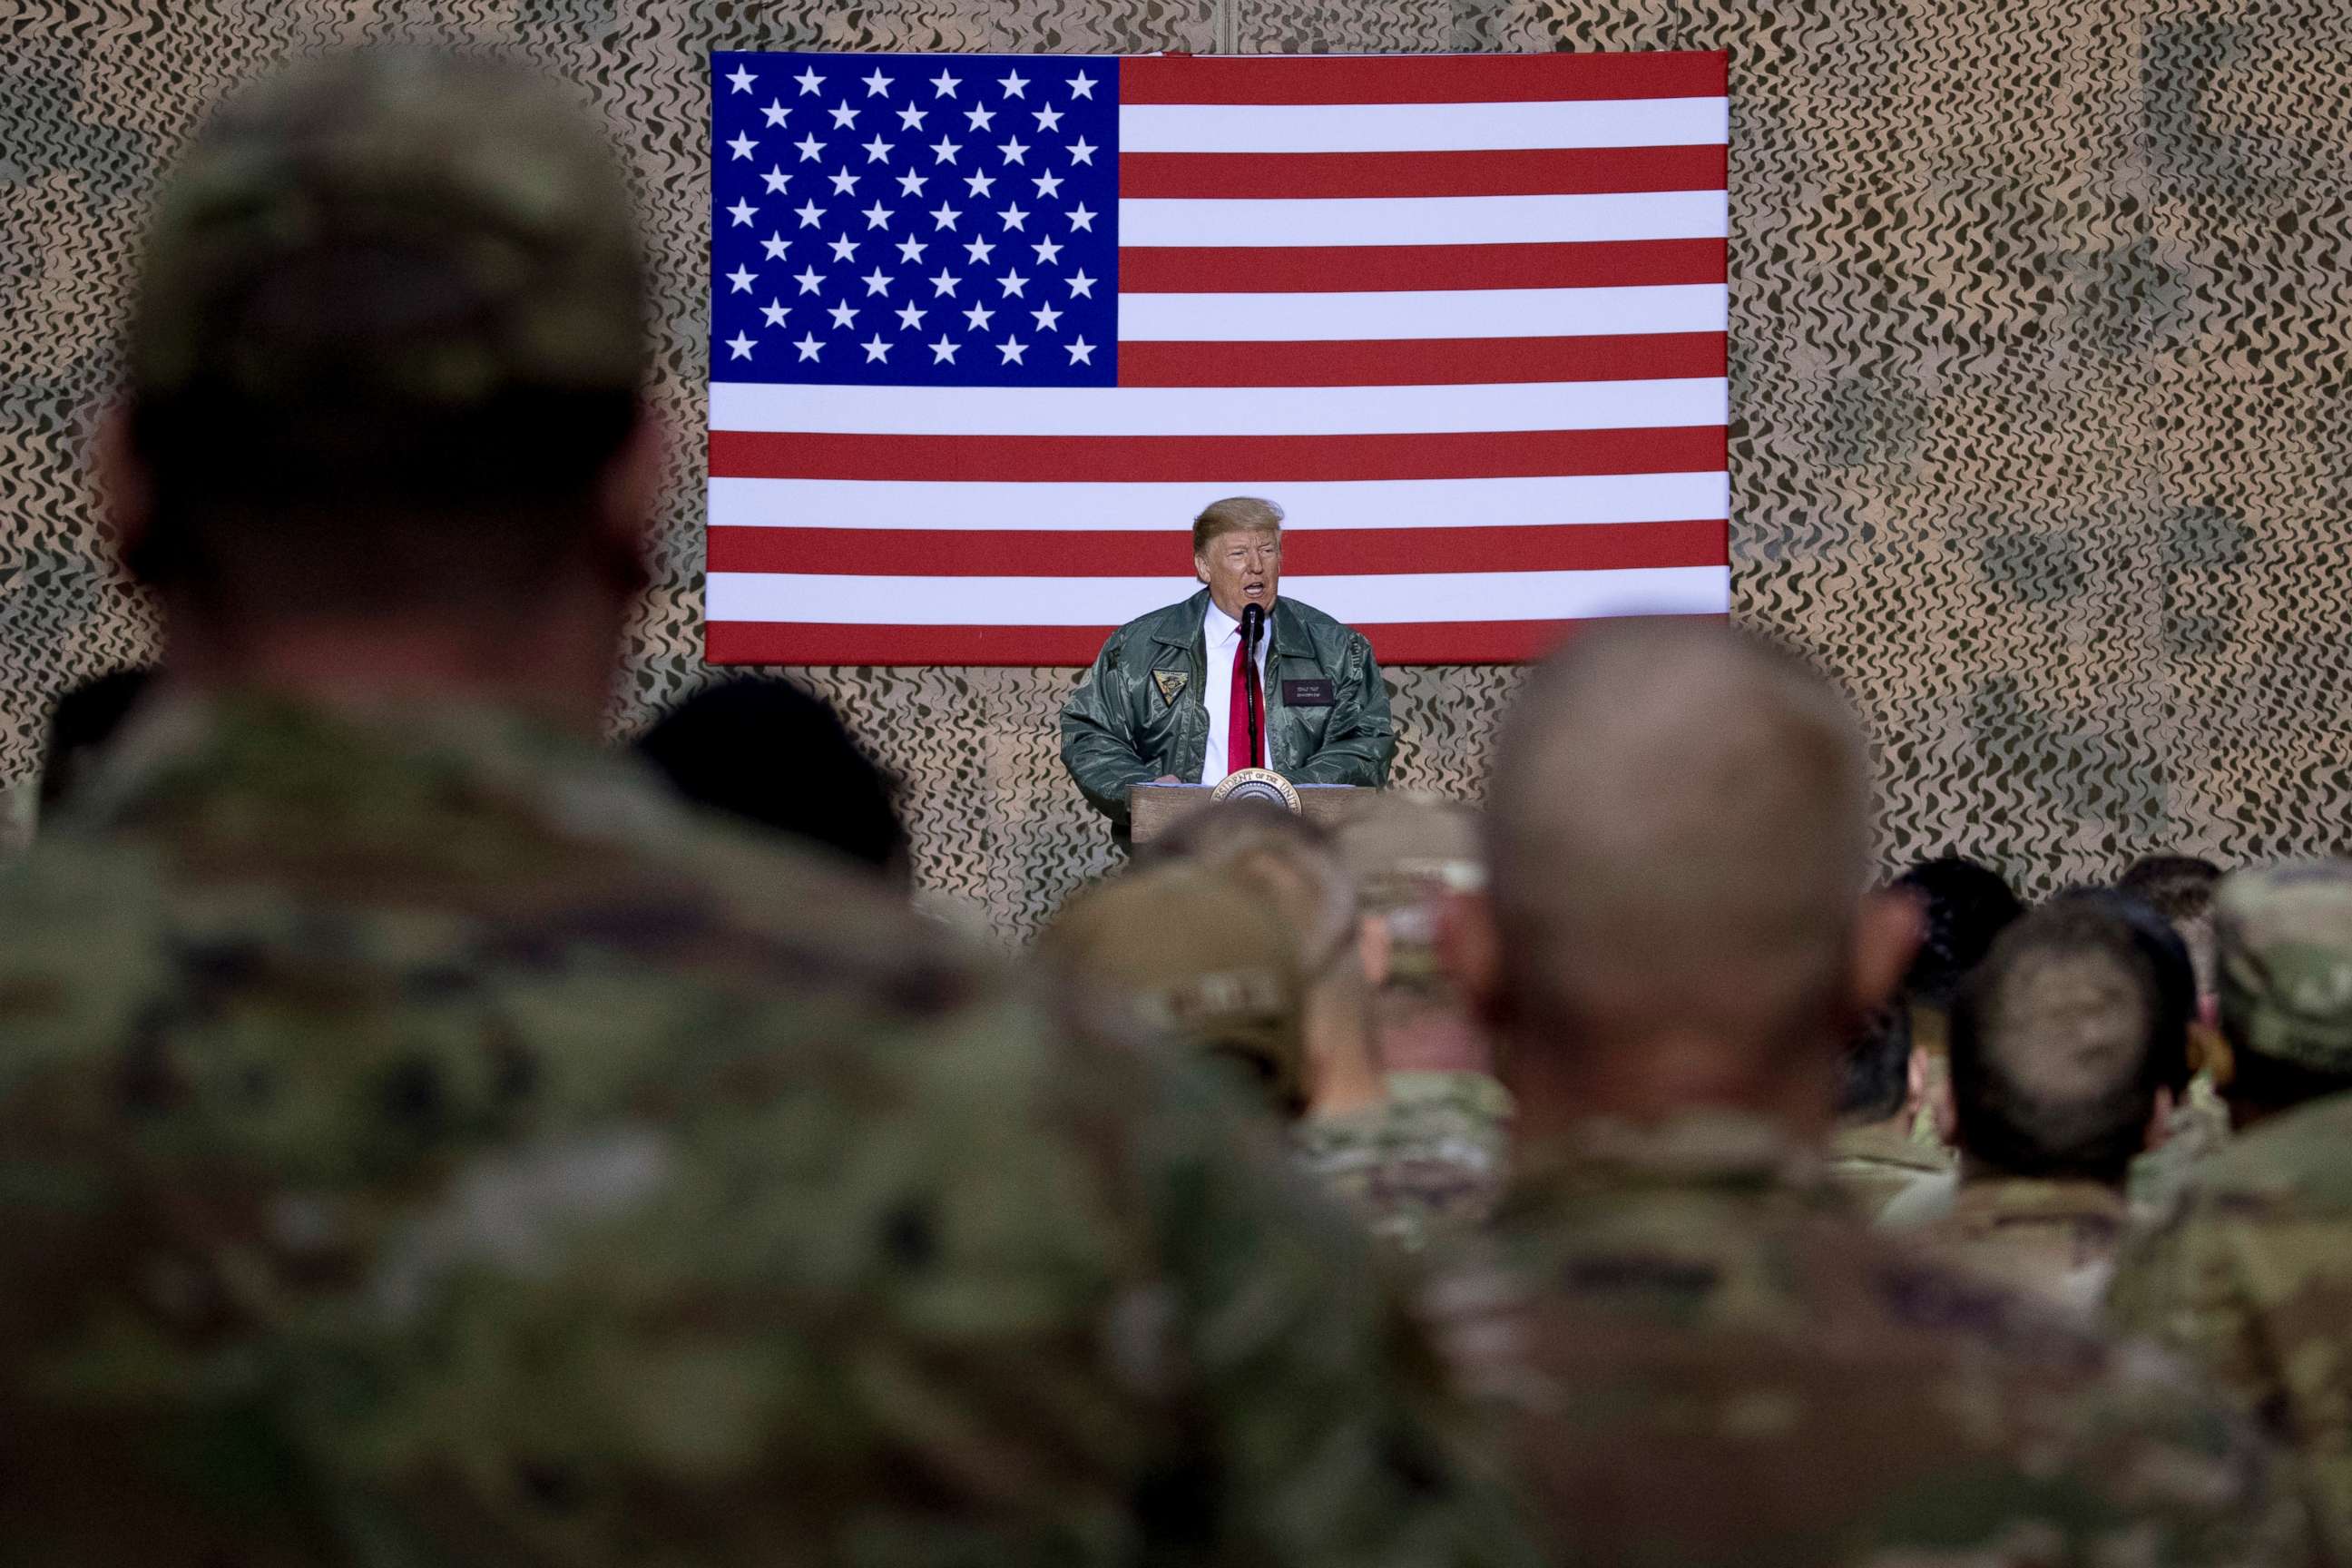 PHOTO: President Donald Trump speaks to members of the military at a hangar rally at Al Asad Air Base, Iraq, Dec. 26, 2018.